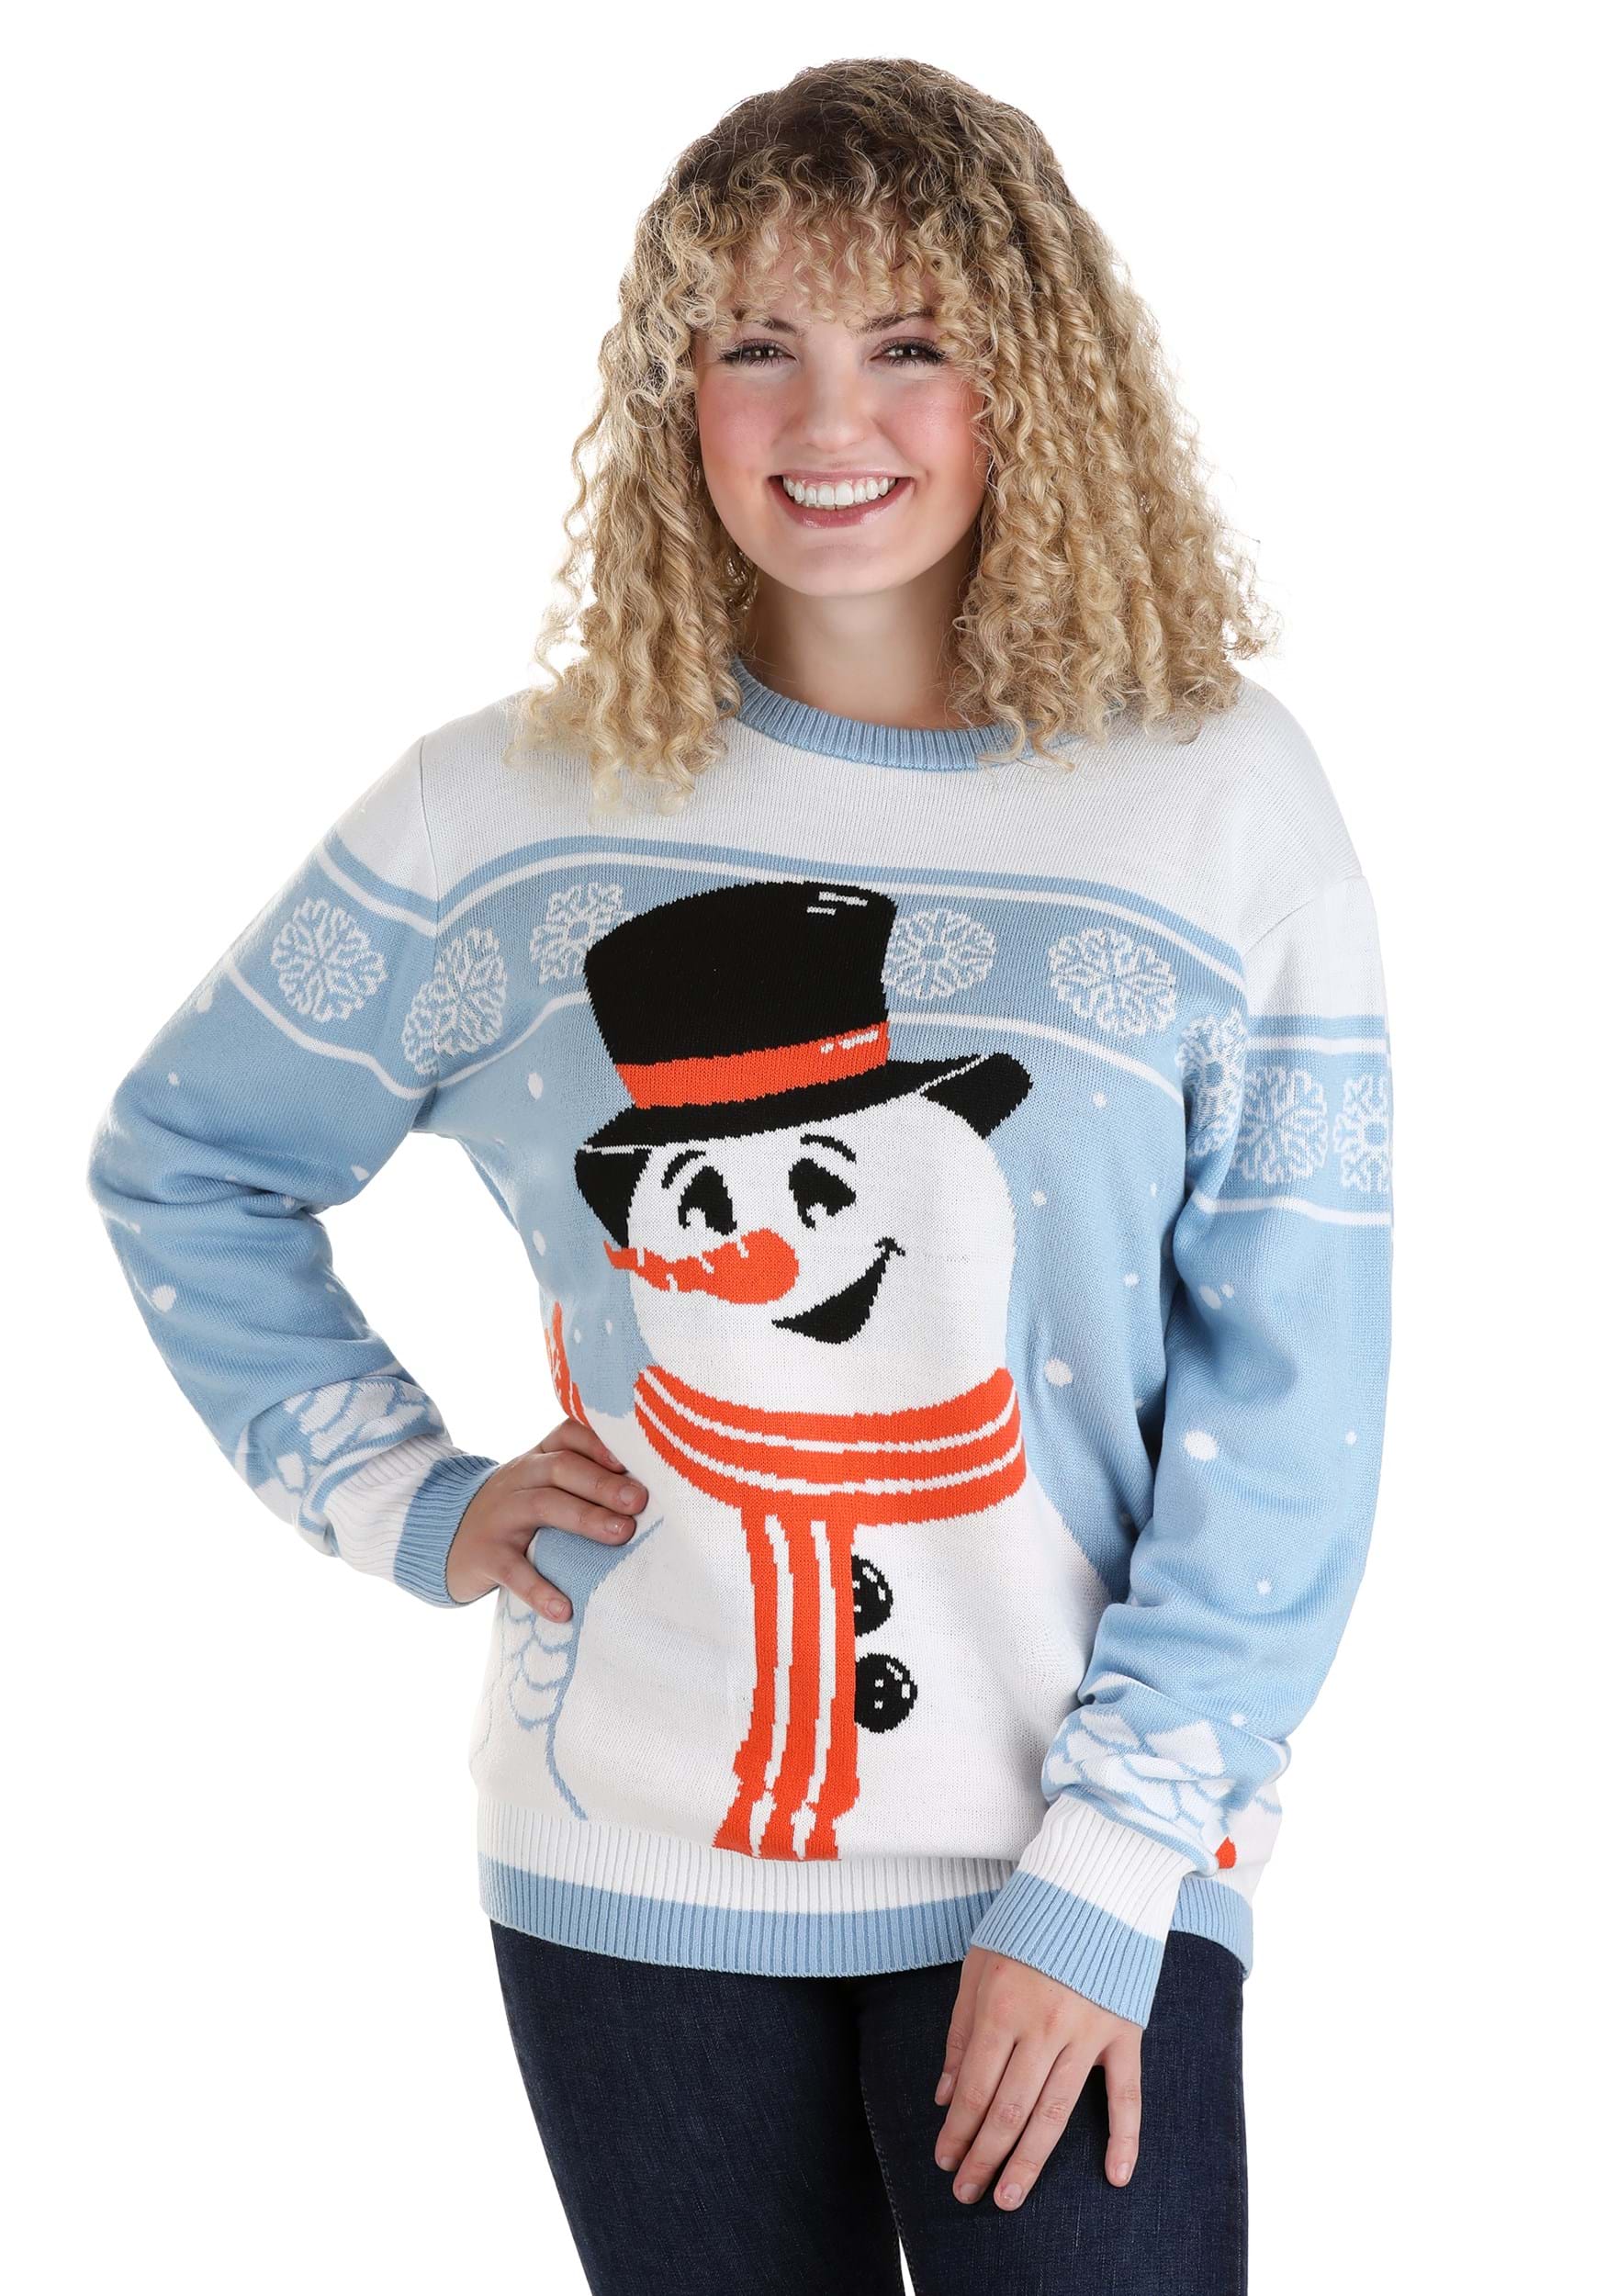 Photos - Fancy Dress Christmas FUN Wear Friendly Snowman Ugly  Sweater | Ugly Holiday Sweaters O 